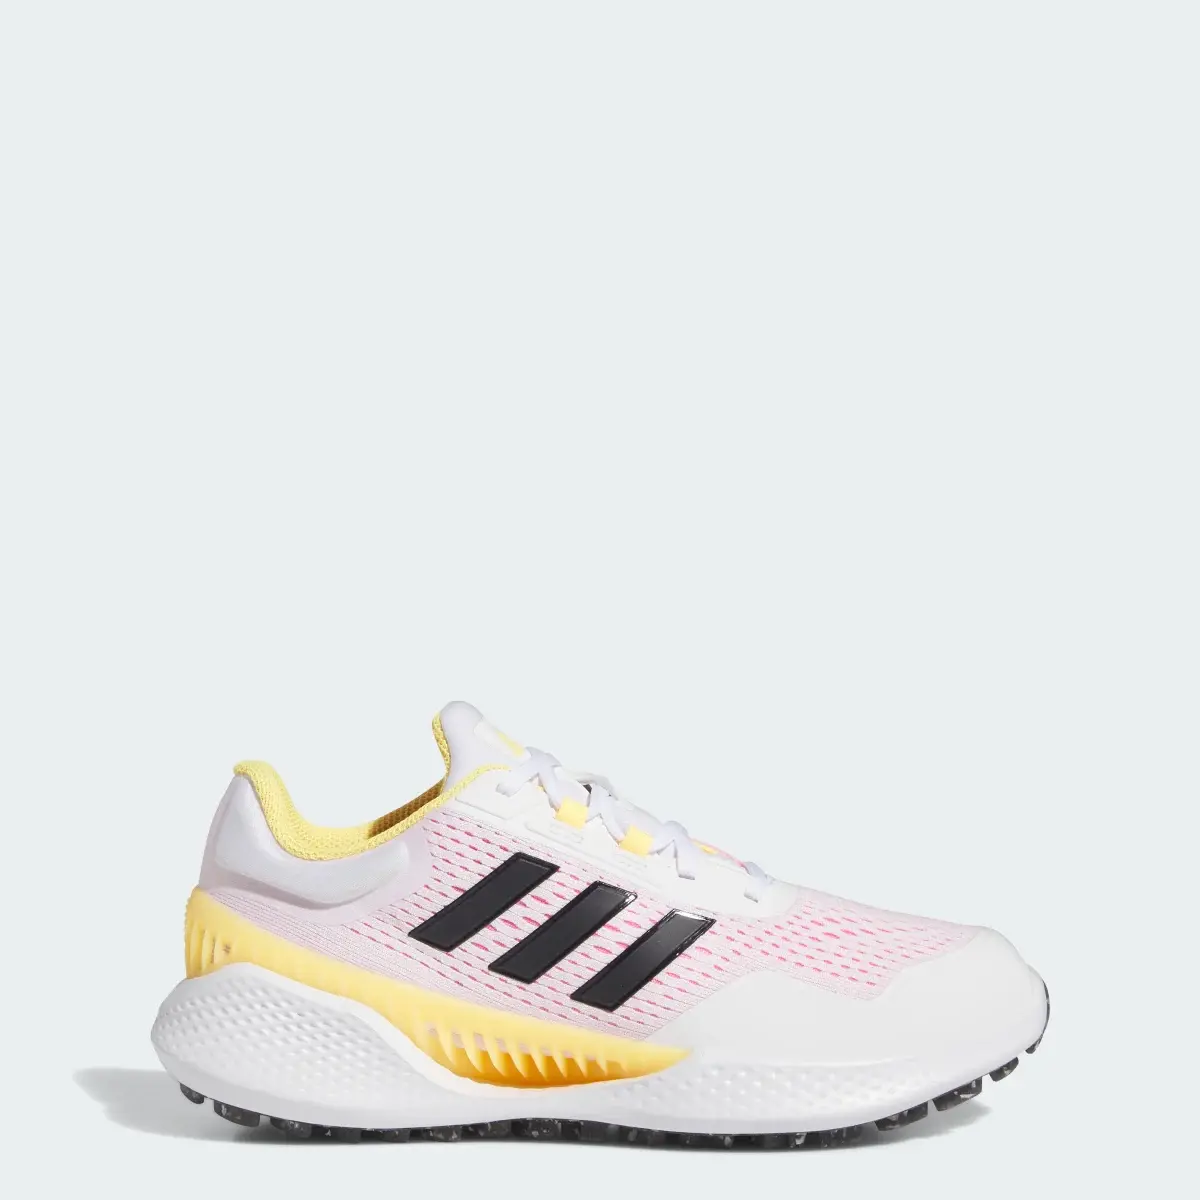 Adidas Summervent 24 Bounce Golf Shoes Low. 1